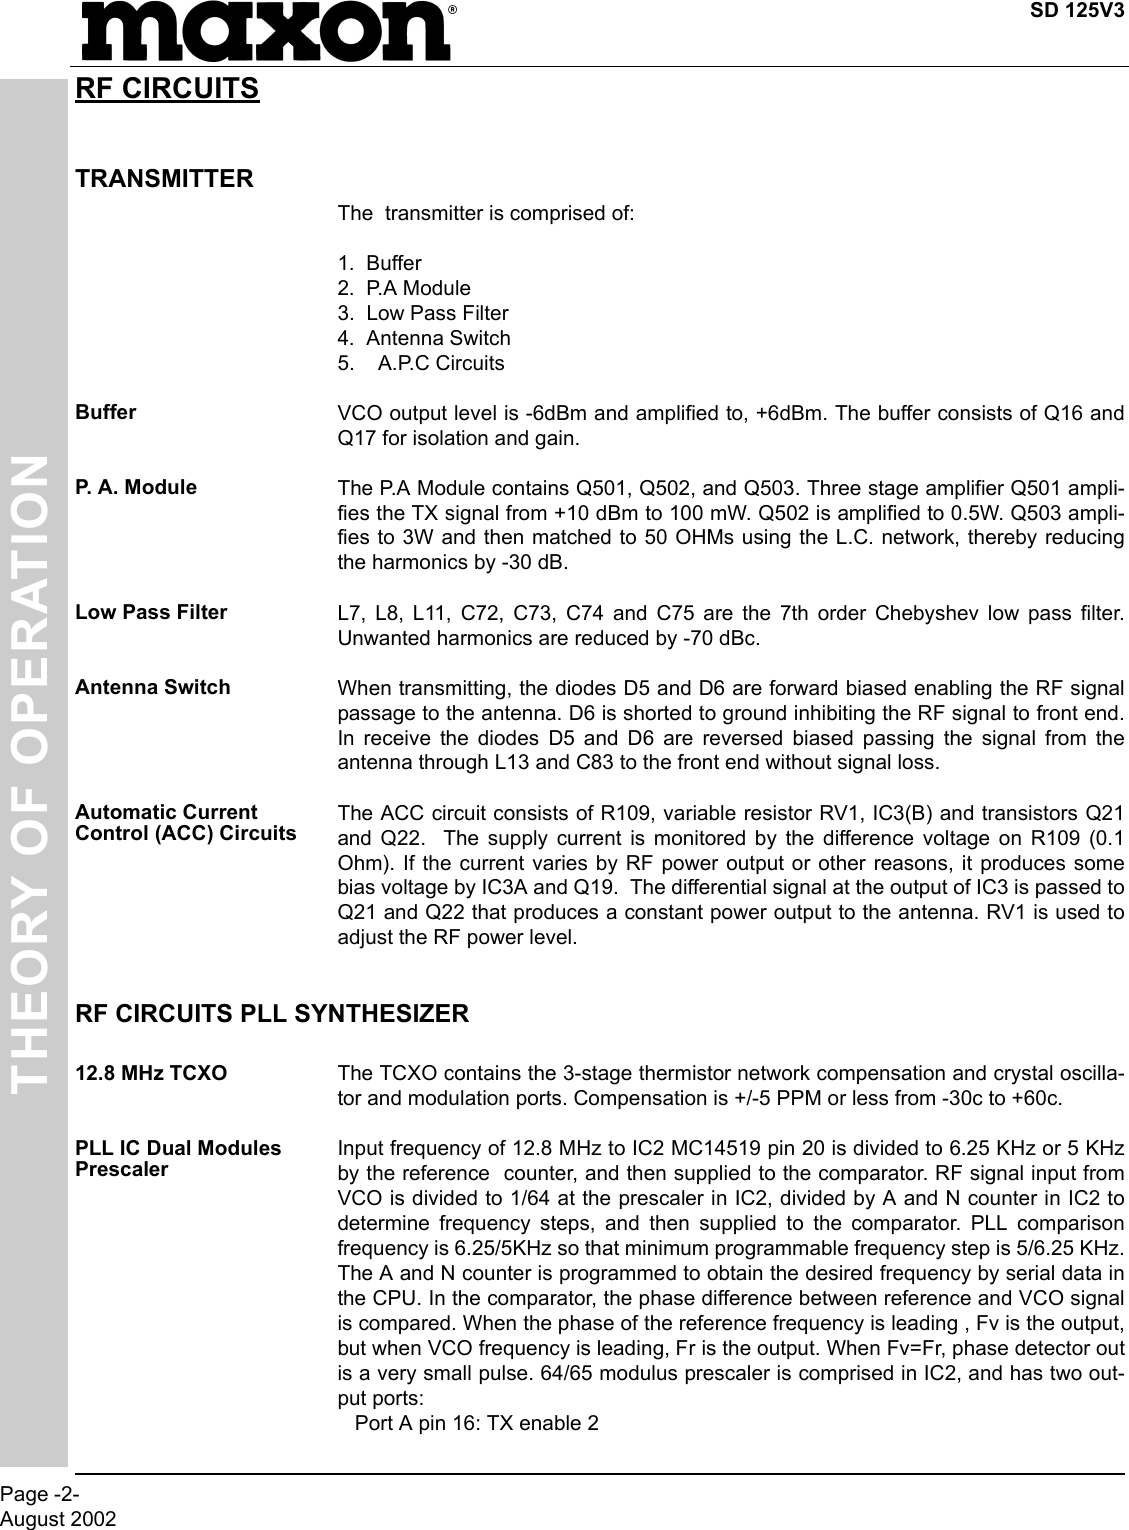 SD 125V3Page -2-August 2002THEORY OF OPERATIONRF CIRCUITSTRANSMITTERThe  transmitter is comprised of:1.  Buffer2.  P.A Module3.  Low Pass Filter4.  Antenna Switch5.    A.P.C CircuitsBuffer VCO output level is -6dBm and amplified to, +6dBm. The buffer consists of Q16 andQ17 for isolation and gain.P.  A .  M o d u l e The P.A Module contains Q501, Q502, and Q503. Three stage amplifier Q501 ampli-fies the TX signal from +10 dBm to 100 mW. Q502 is amplified to 0.5W. Q503 ampli-fies to 3W and then matched to 50 OHMs using the L.C. network, thereby reducingthe harmonics by -30 dB.Low Pass Filter L7, L8, L11, C72, C73, C74 and C75 are the 7th order Chebyshev low pass filter.Unwanted harmonics are reduced by -70 dBc.Antenna Switch When transmitting, the diodes D5 and D6 are forward biased enabling the RF signalpassage to the antenna. D6 is shorted to ground inhibiting the RF signal to front end.In receive the diodes D5 and D6 are reversed biased passing the signal from theantenna through L13 and C83 to the front end without signal loss.Automatic Current Control (ACC) CircuitsThe ACC circuit consists of R109, variable resistor RV1, IC3(B) and transistors Q21and Q22.  The supply current is monitored by the difference voltage on R109 (0.1Ohm). If the current varies by RF power output or other reasons, it produces somebias voltage by IC3A and Q19.  The differential signal at the output of IC3 is passed toQ21 and Q22 that produces a constant power output to the antenna. RV1 is used toadjust the RF power level.RF CIRCUITS PLL SYNTHESIZER 12.8 MHz TCXO The TCXO contains the 3-stage thermistor network compensation and crystal oscilla-tor and modulation ports. Compensation is +/-5 PPM or less from -30c to +60c.PLL IC Dual Modules PrescalerInput frequency of 12.8 MHz to IC2 MC14519 pin 20 is divided to 6.25 KHz or 5 KHzby the reference  counter, and then supplied to the comparator. RF signal input fromVCO is divided to 1/64 at the prescaler in IC2, divided by A and N counter in IC2 todetermine frequency steps, and then supplied to the comparator. PLL comparisonfrequency is 6.25/5KHz so that minimum programmable frequency step is 5/6.25 KHz.The A and N counter is programmed to obtain the desired frequency by serial data inthe CPU. In the comparator, the phase difference between reference and VCO signalis compared. When the phase of the reference frequency is leading , Fv is the output,but when VCO frequency is leading, Fr is the output. When Fv=Fr, phase detector outis a very small pulse. 64/65 modulus prescaler is comprised in IC2, and has two out-put ports:   Port A pin 16: TX enable 2